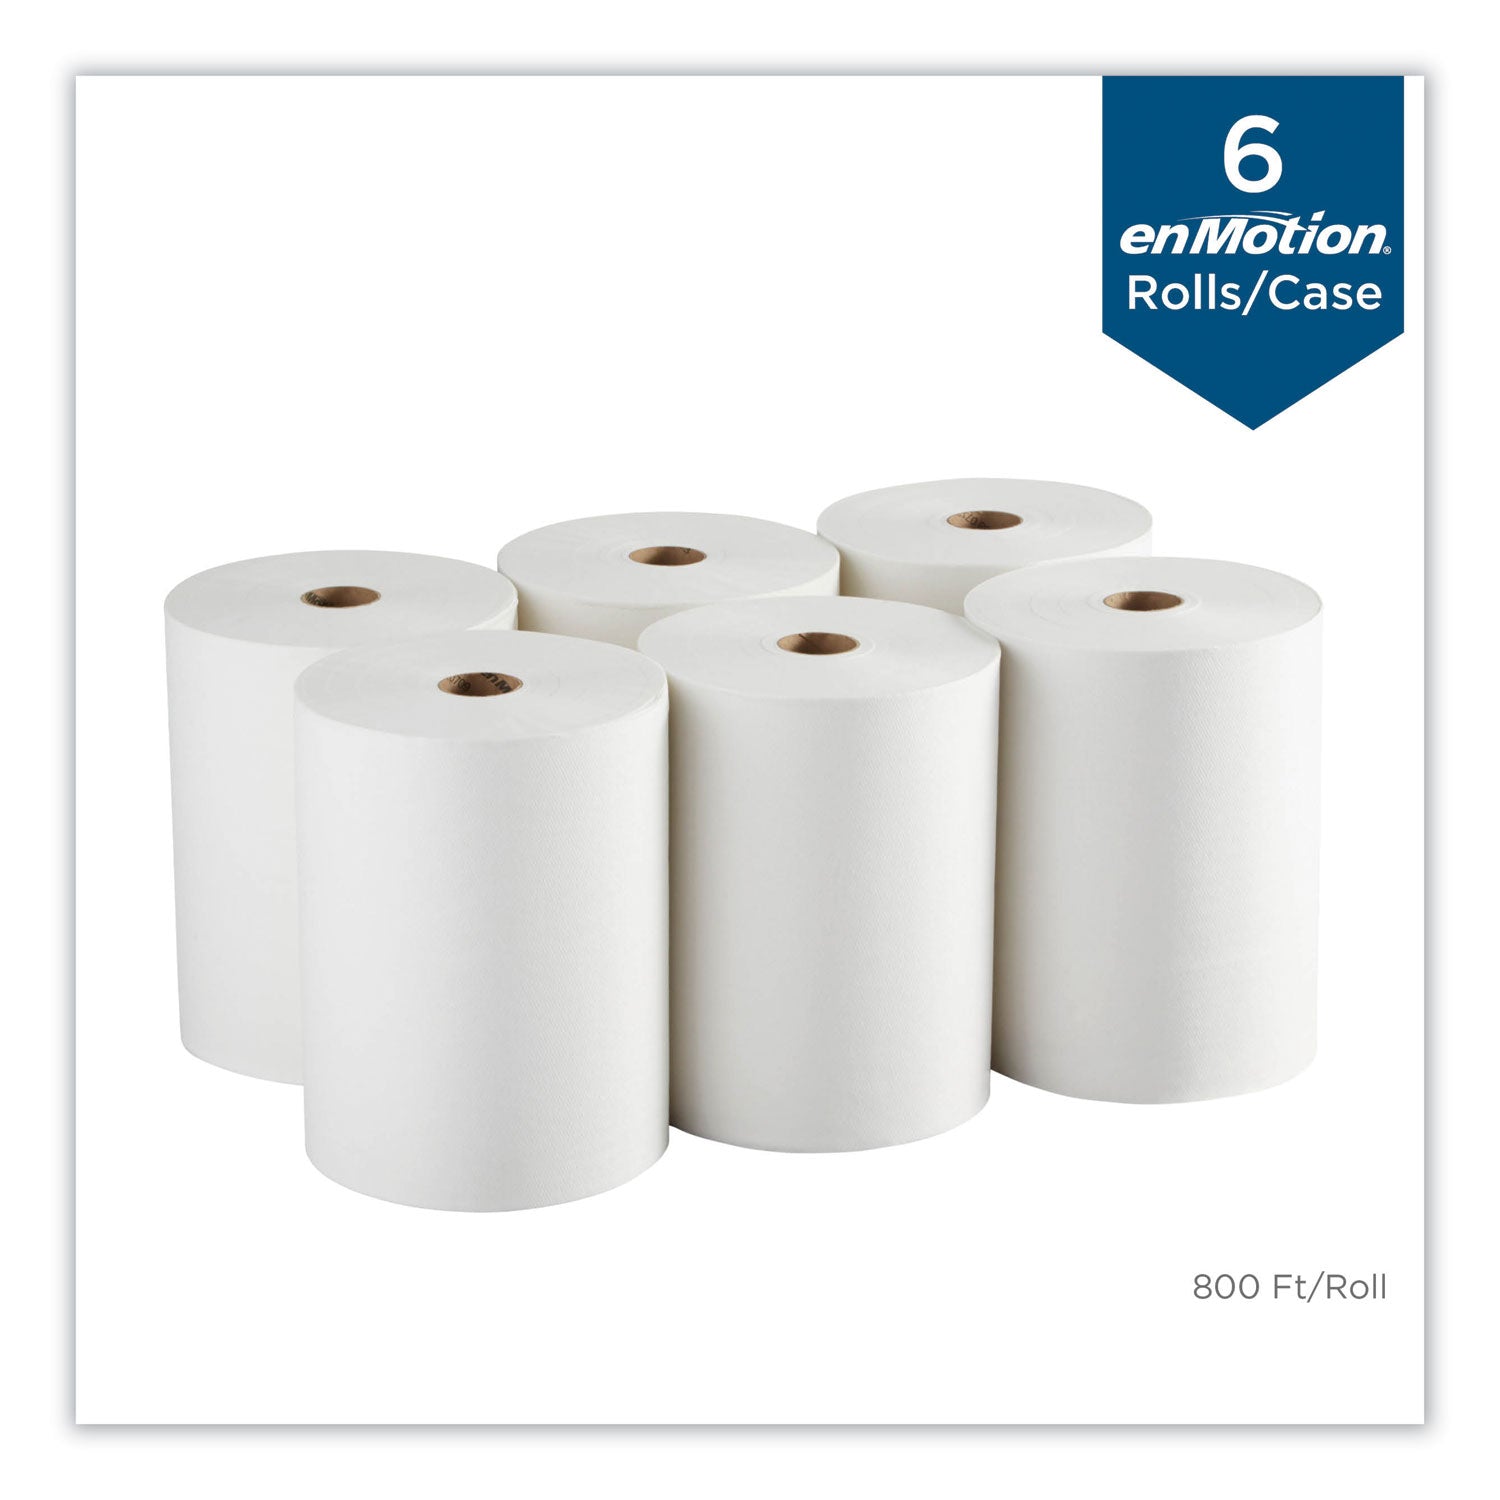 enMotion Paper Towel Rolls, 10" x 800', 40% Recycled, White, Pack Of 6 Rolls - 1 Ply - 10" x 800 ft - 1.75" Core - White - Soft, Absorbent, Long Lasting - For Multipurpose - 6 / Carton - 3